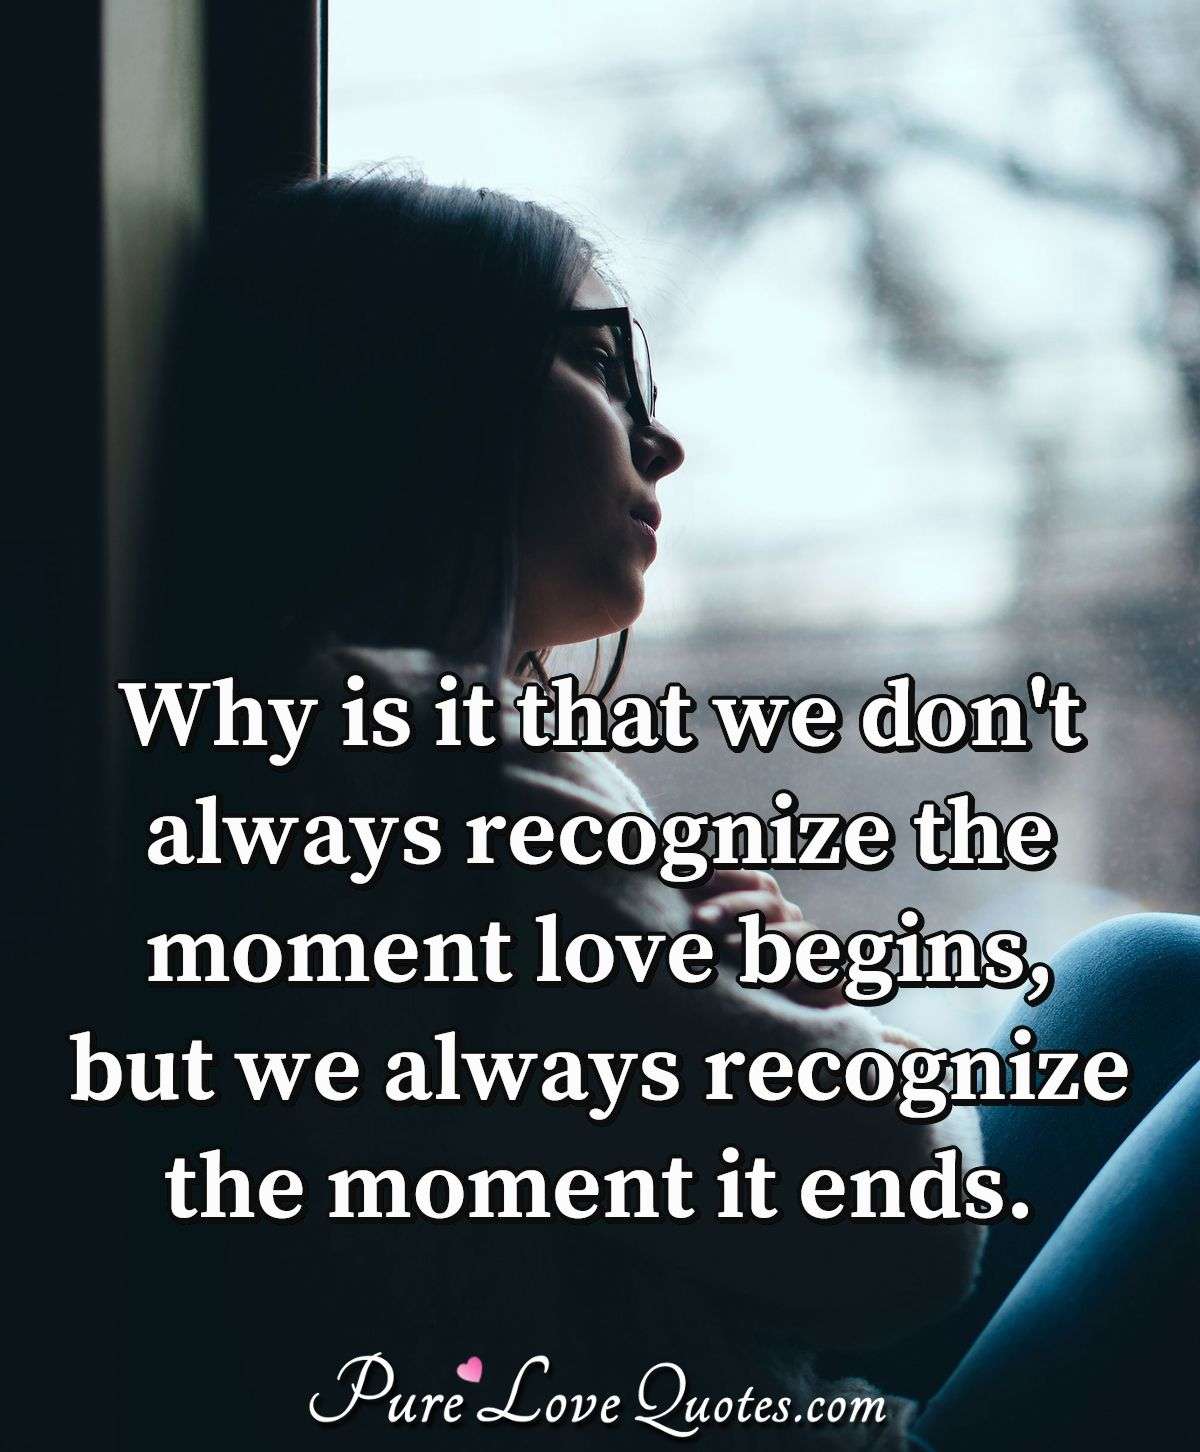 Why is it that we don't always recognize the moment love begins, but we always recognize the moment it ends. - Anonymous